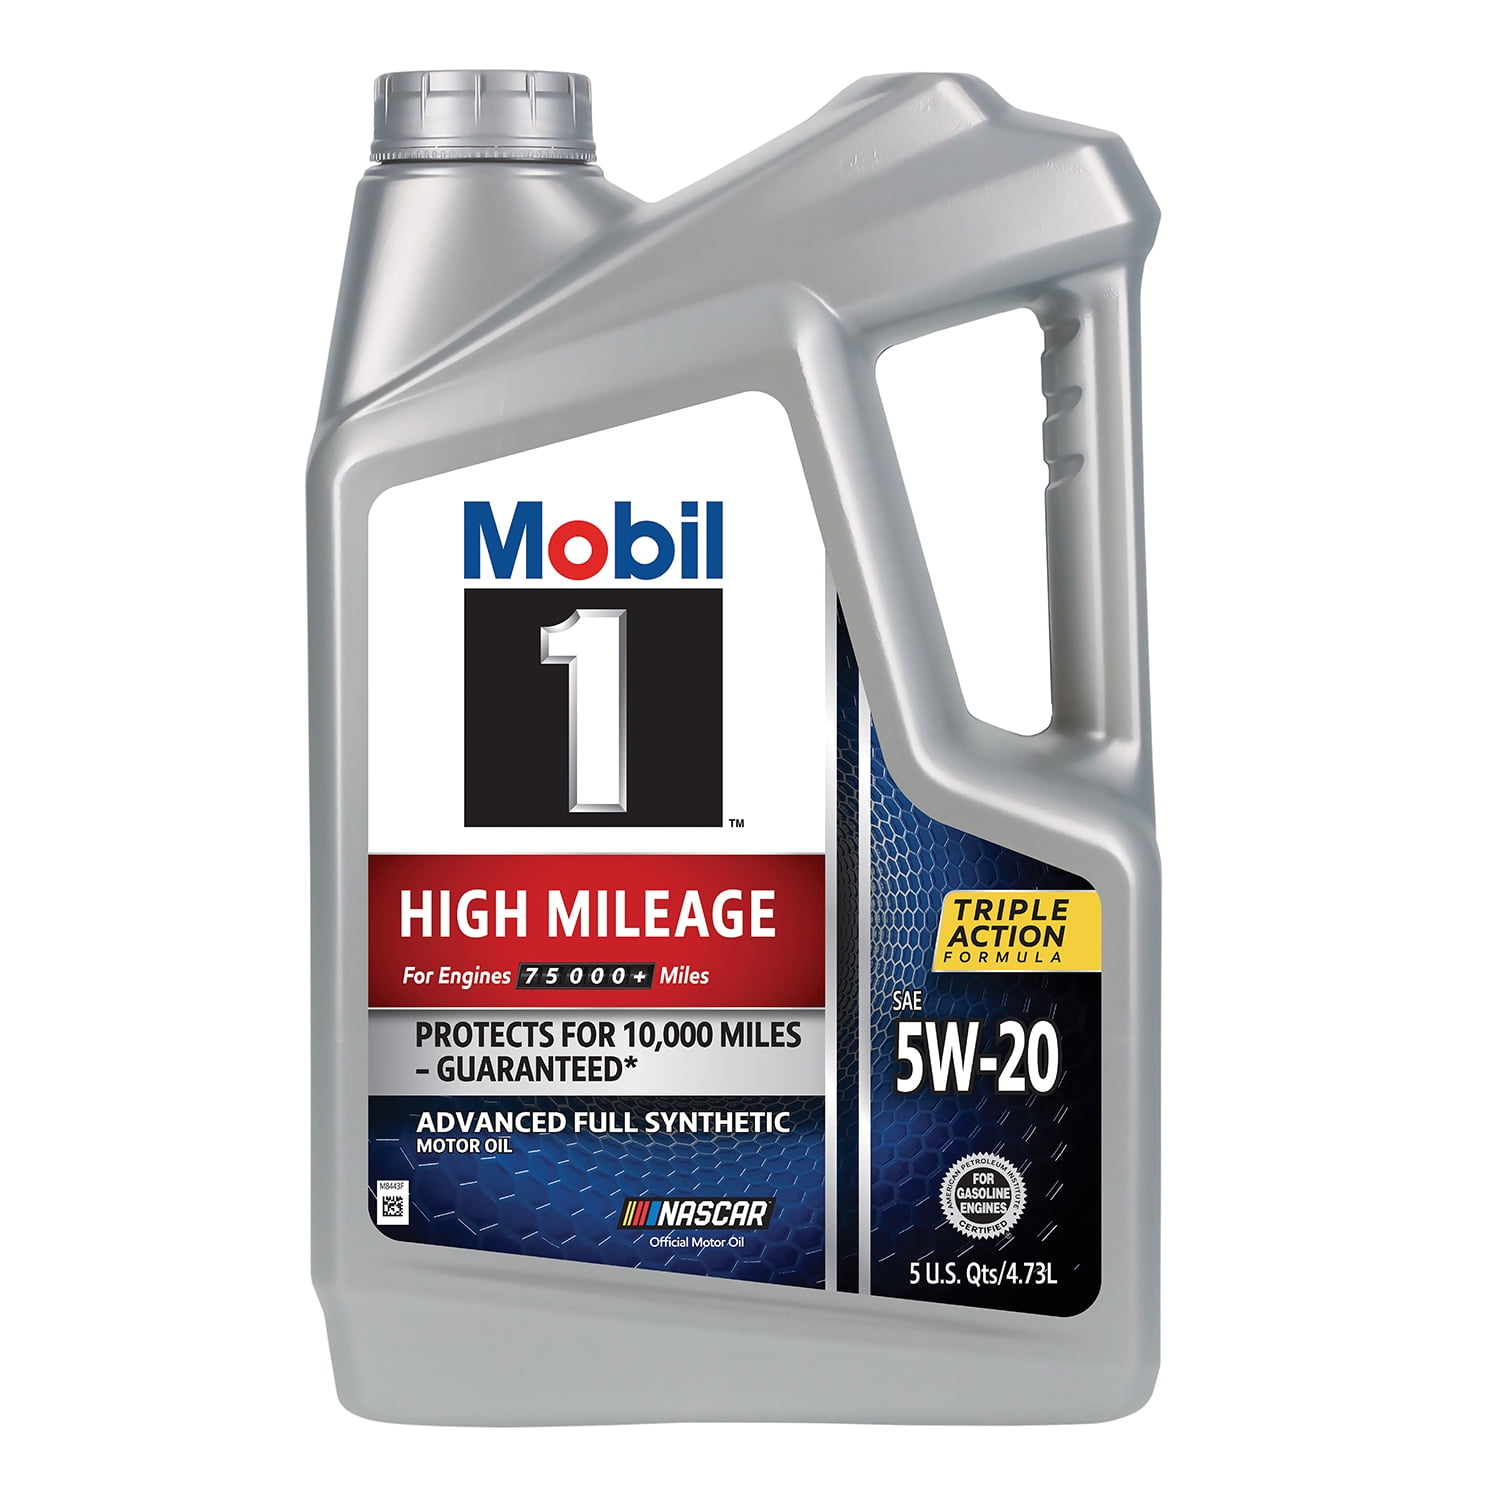 Mobil 1 High Mileage Full Synthetic Motor Oil 5W-20, 5 qt (3 Pack) - 1